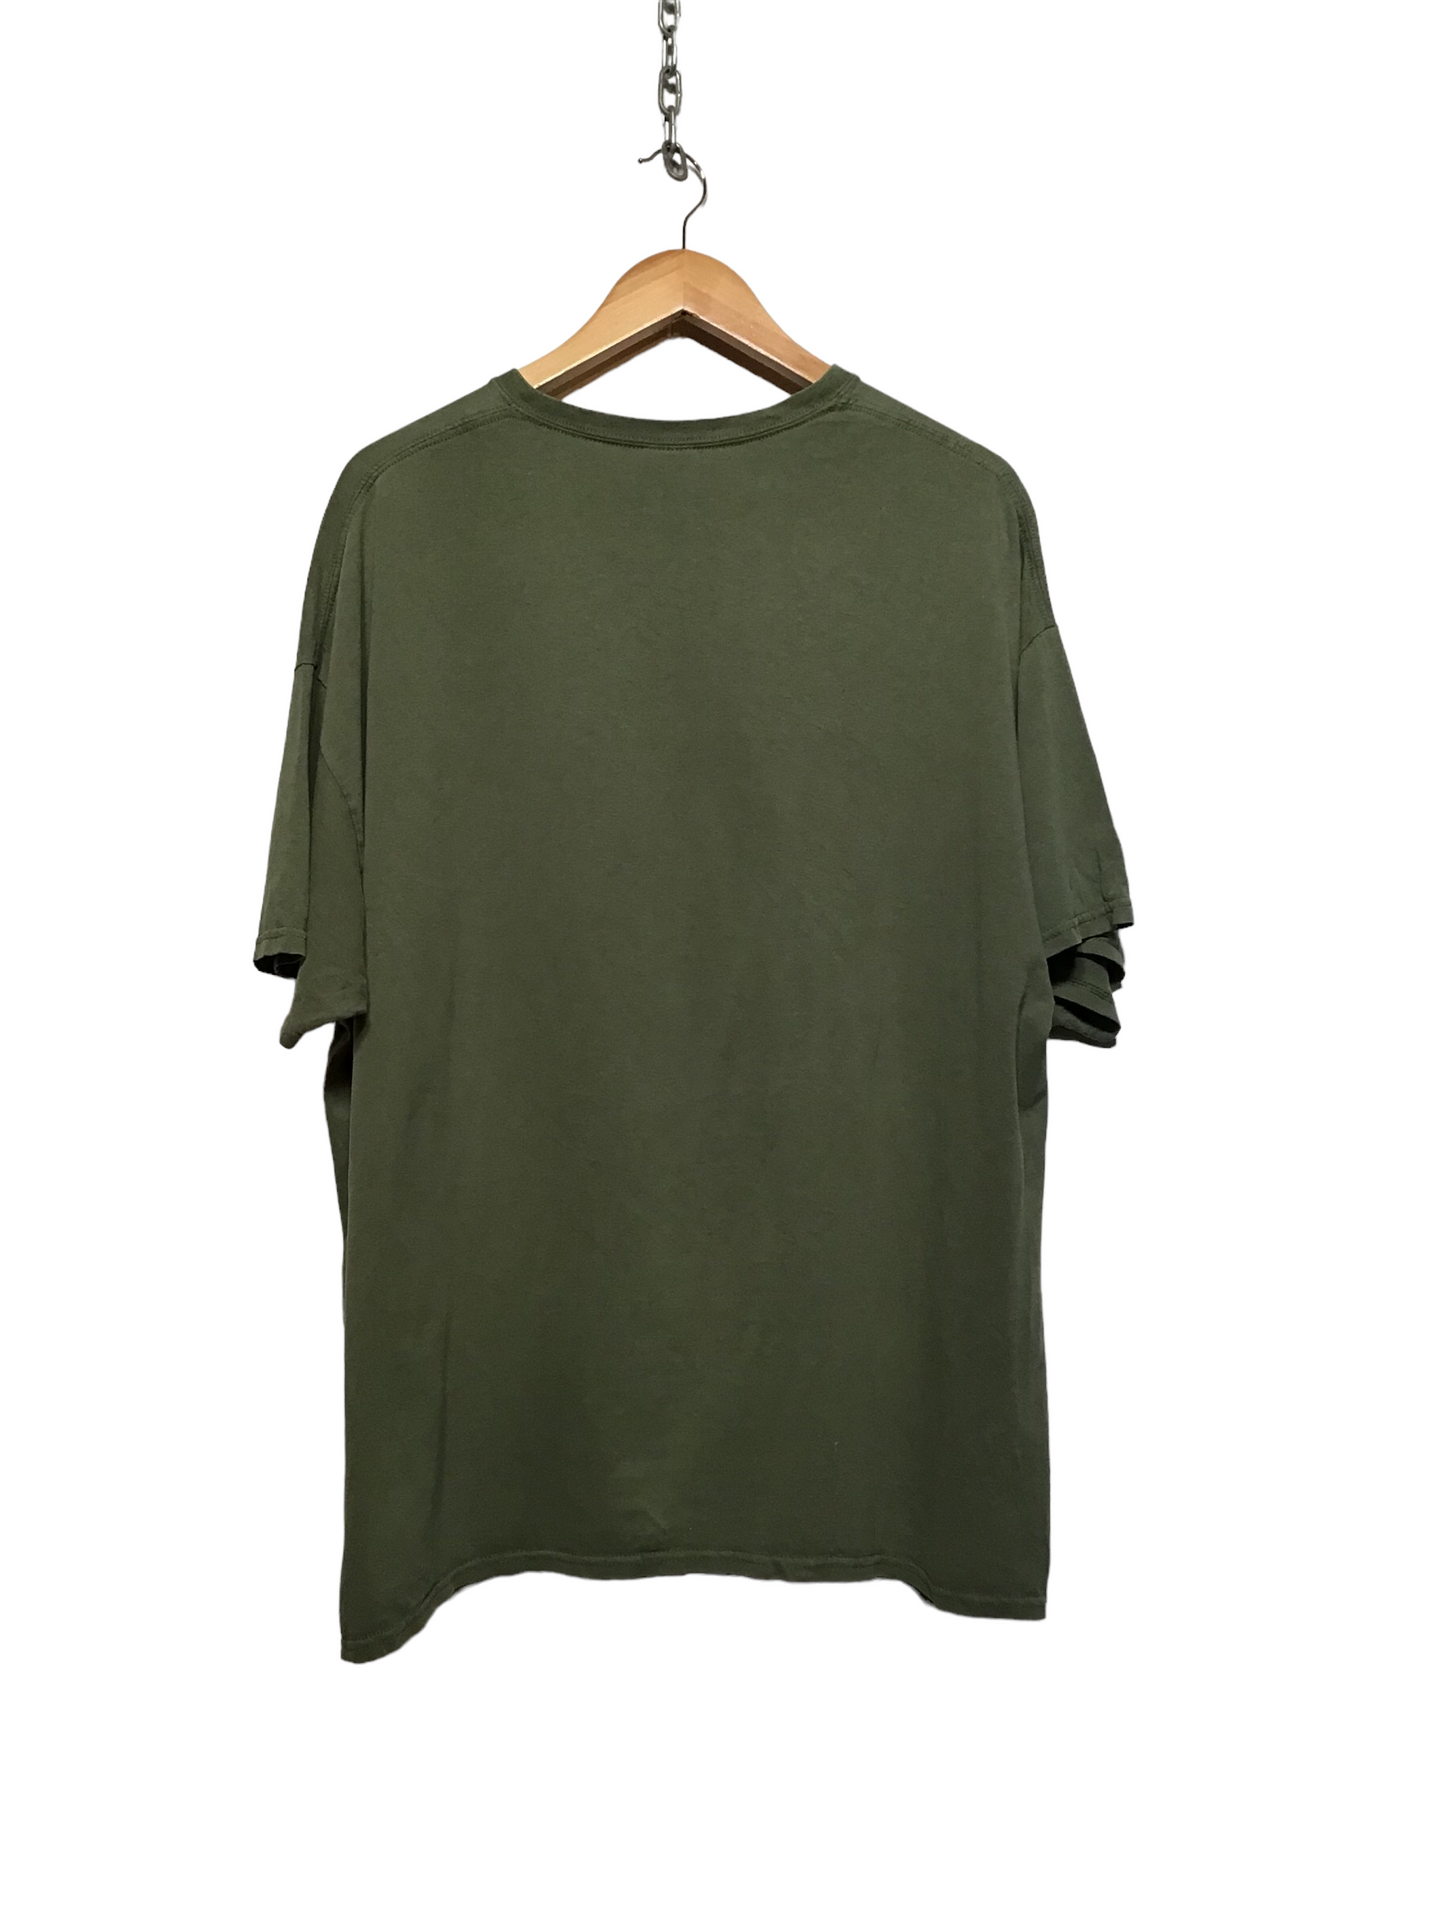 Green Army Tee (Size XL)